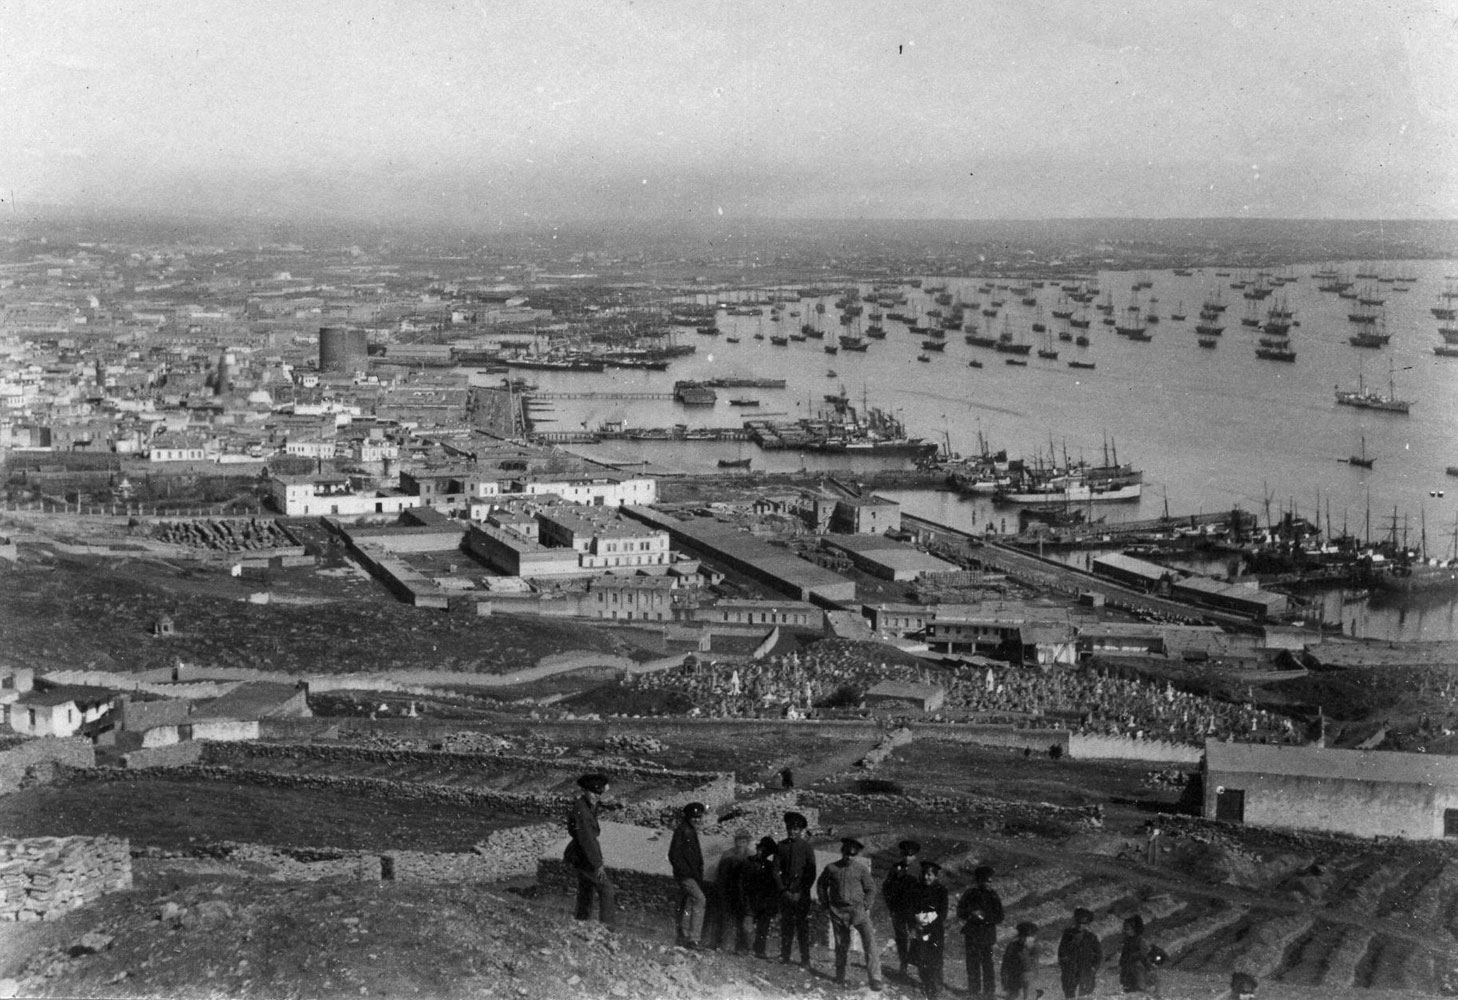 A general view over Baku. New liberal legislation encouraged the inflow of foreign capital, which resulted in the dramatic expansion of the oil industry. By the turn of the 20th century, Baku was producing 50 per cent of the world’s oil.